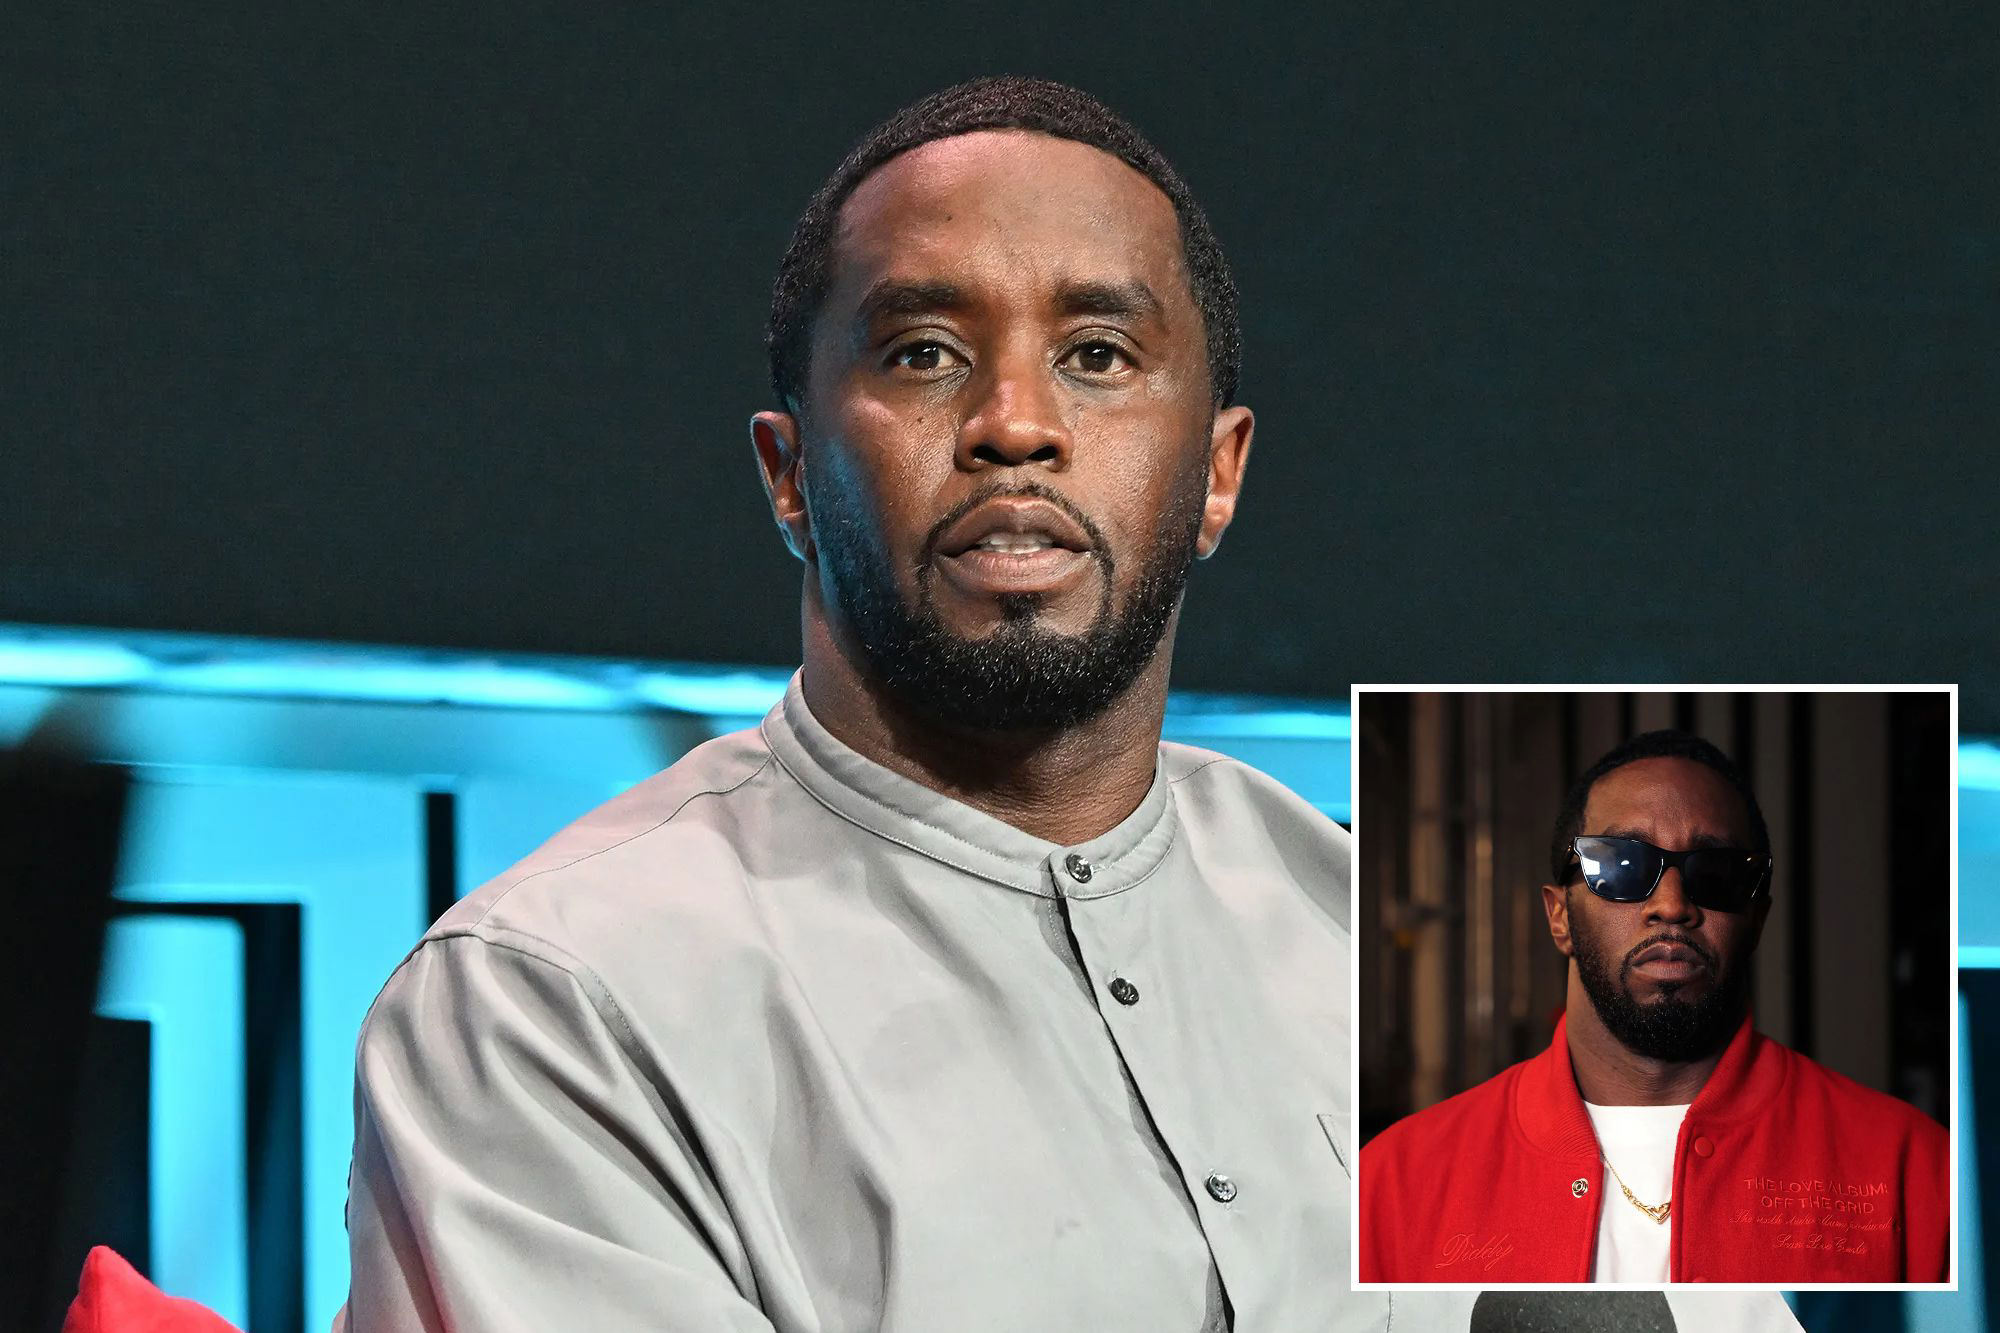 Sean ‘Diddy’ Combs faces new allegations he drugged and raped a woman ...